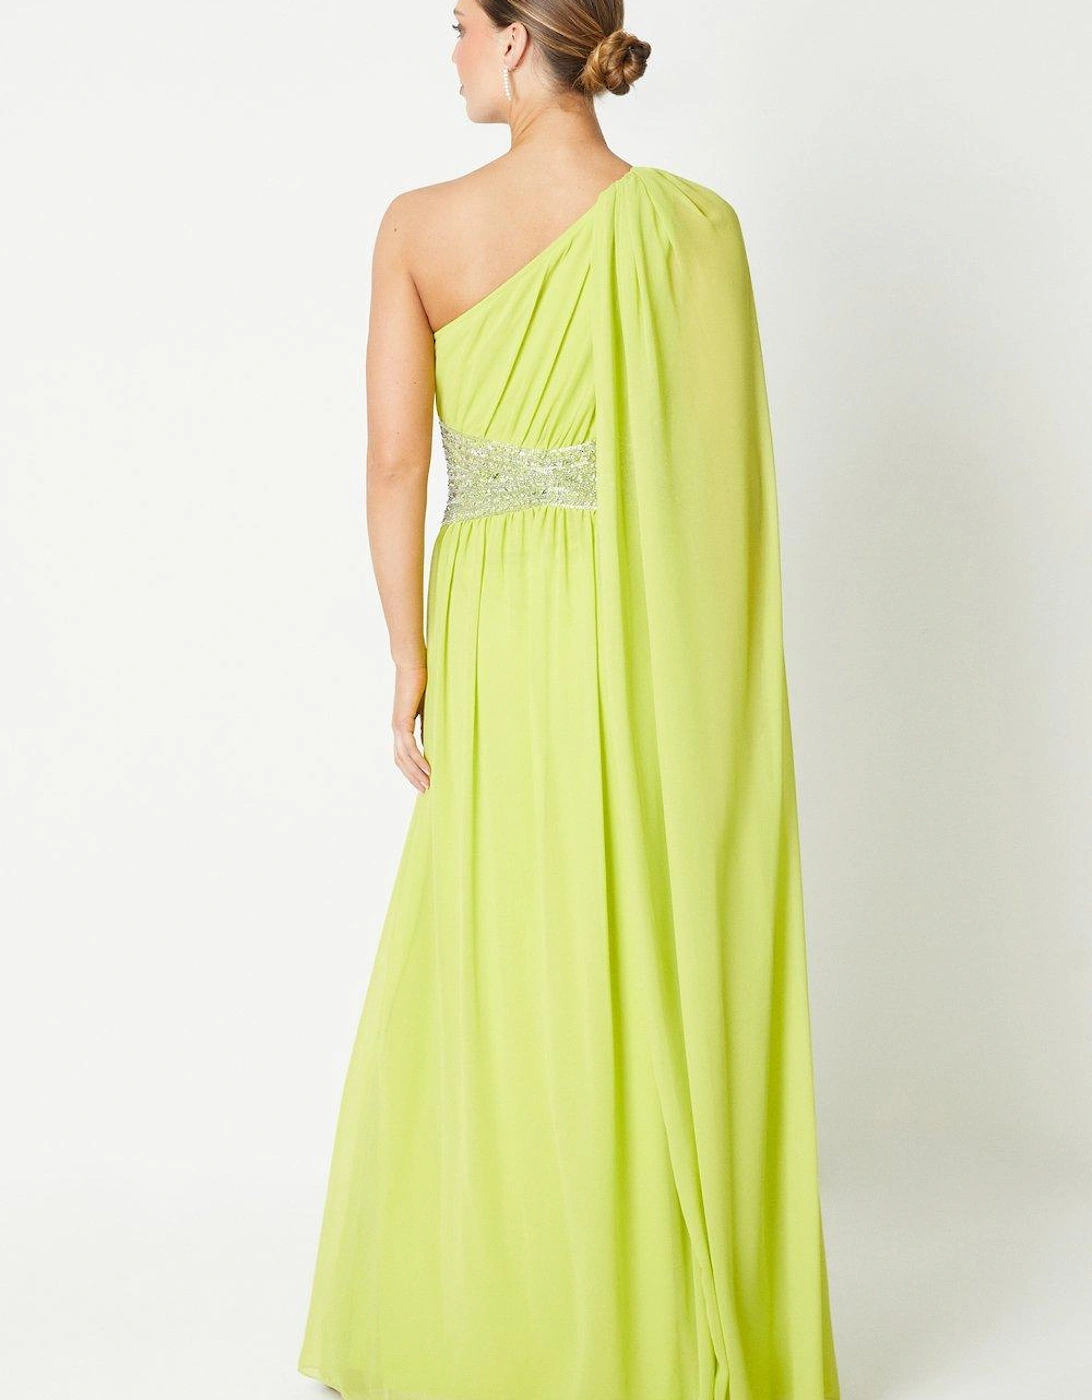 Chiffon Cape Sleeve Gown With Beaded Waistband - Black Tie